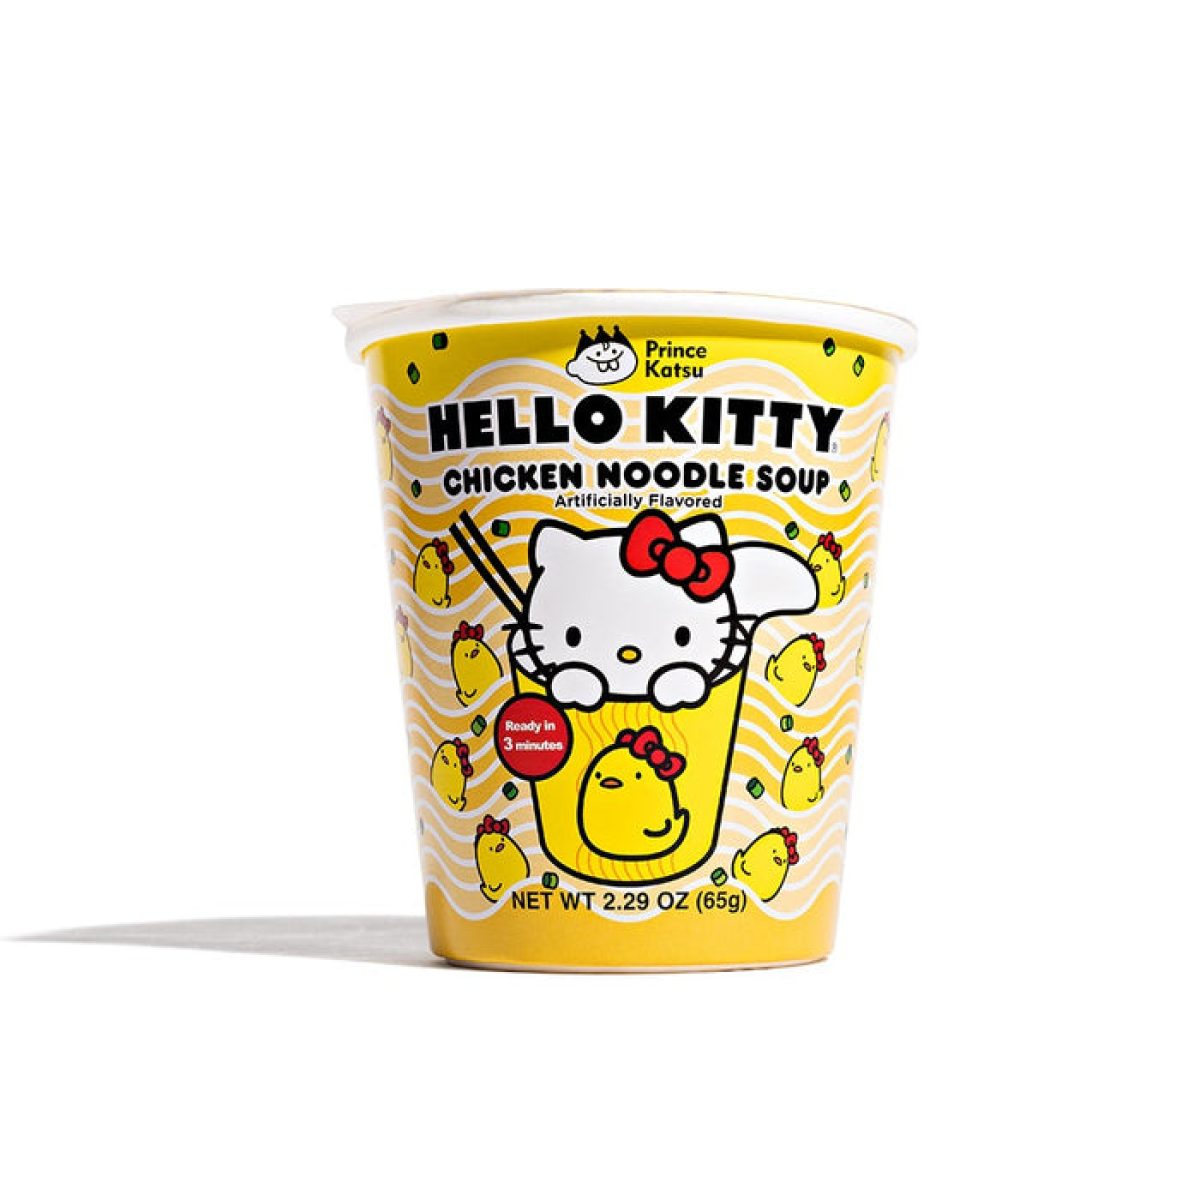 Hello Kitty Lunch Box Set for Girls - Bundle with Hello Kitty Lunch Box for  Girls, Hello Kitty Stickers, More | Hello Kitty Lunch Bag